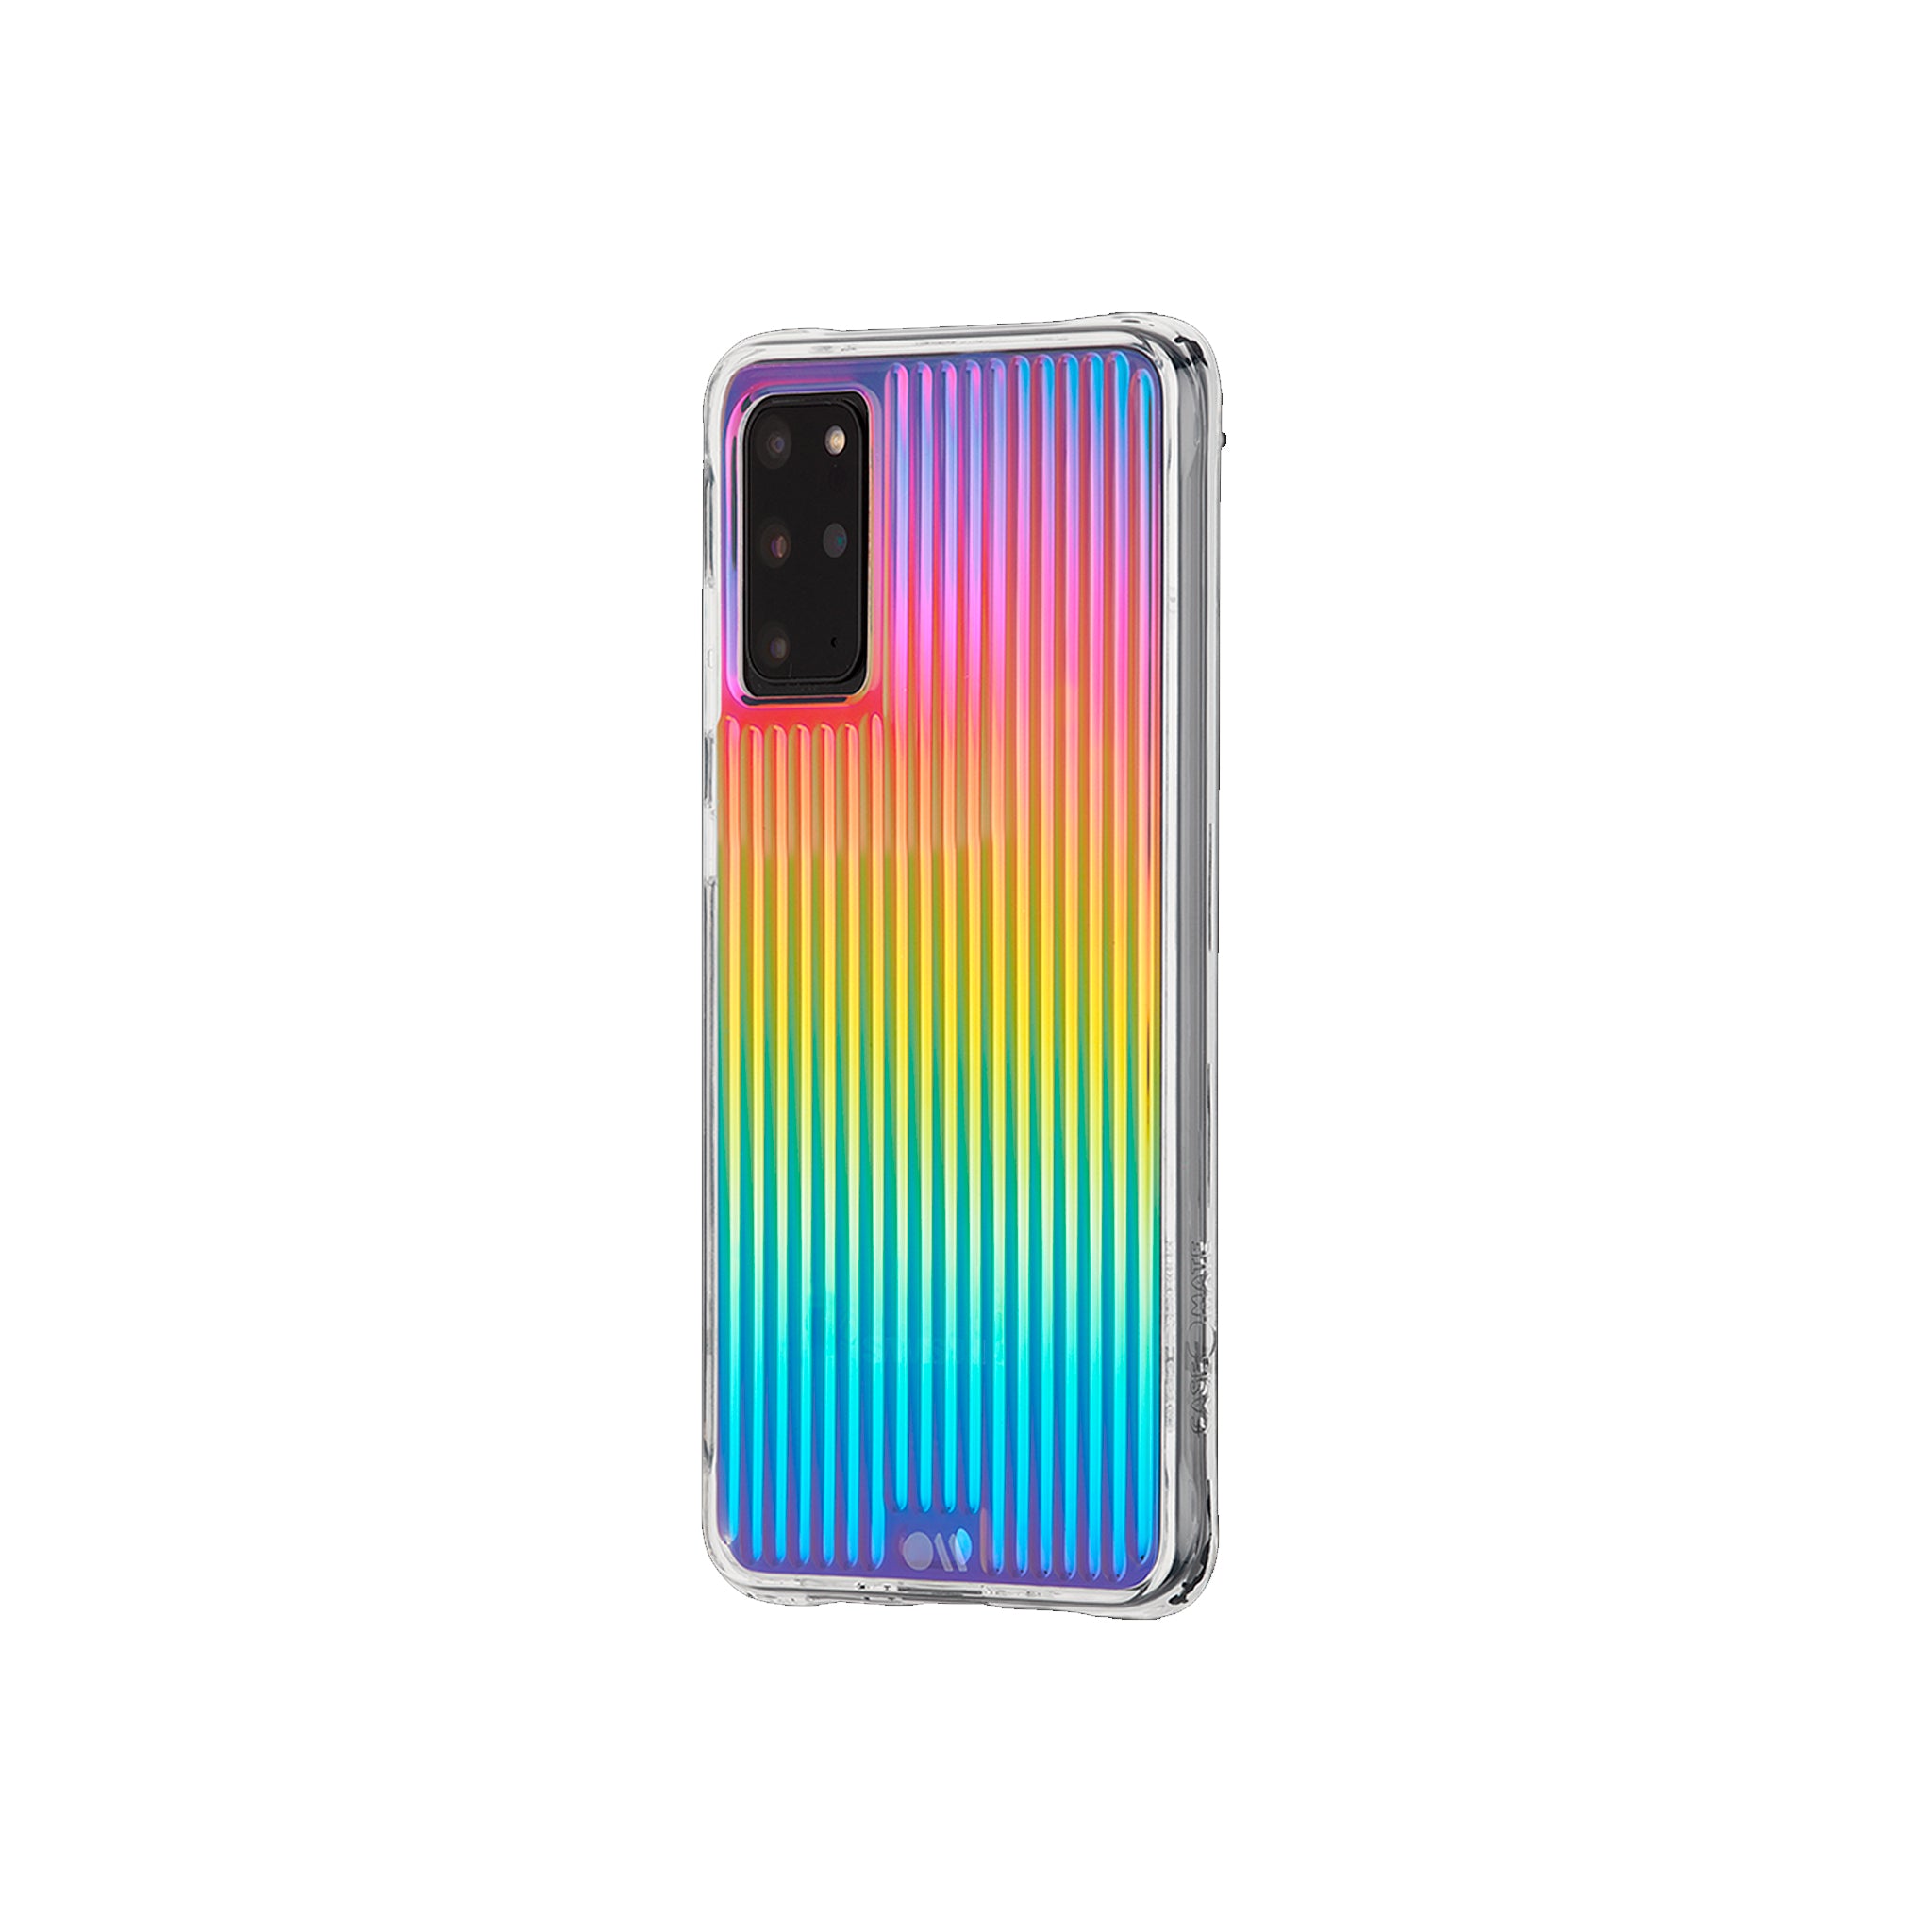 Case-mate - Tough Groove Case For Samsung Galaxy S20 Plus - Iridescent